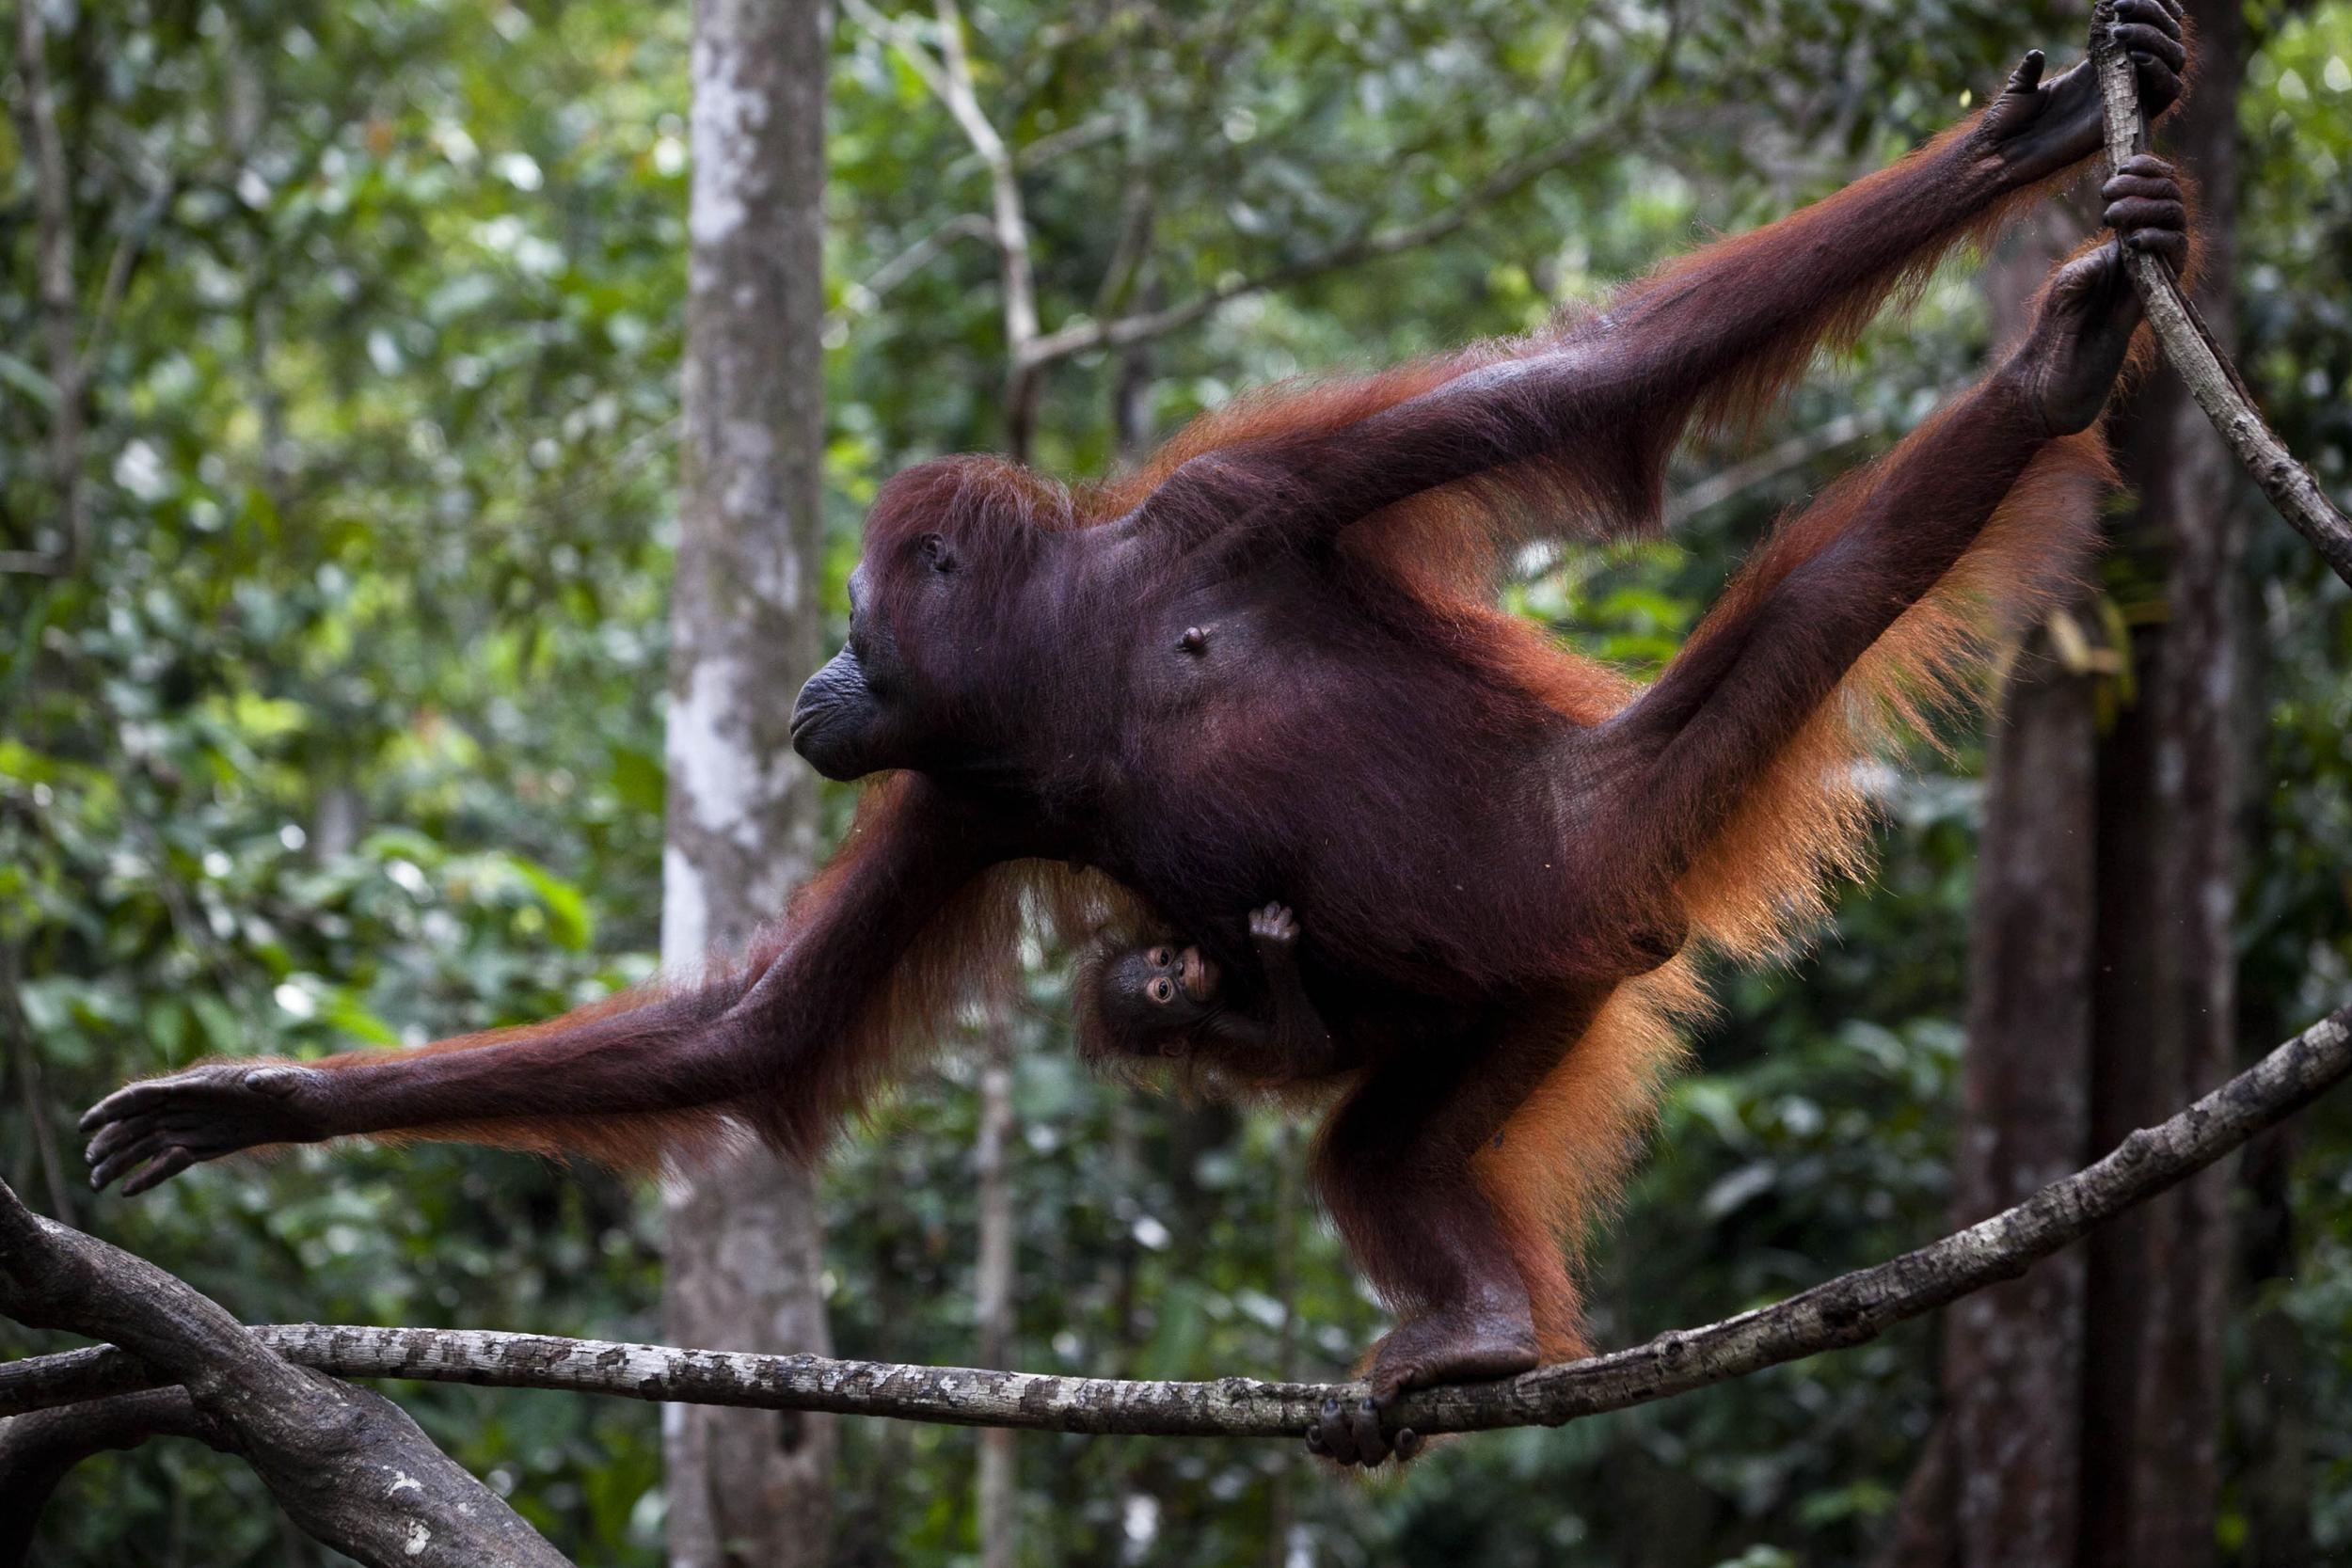 Orangutan mother outstretched between trees with small baby clinging to her